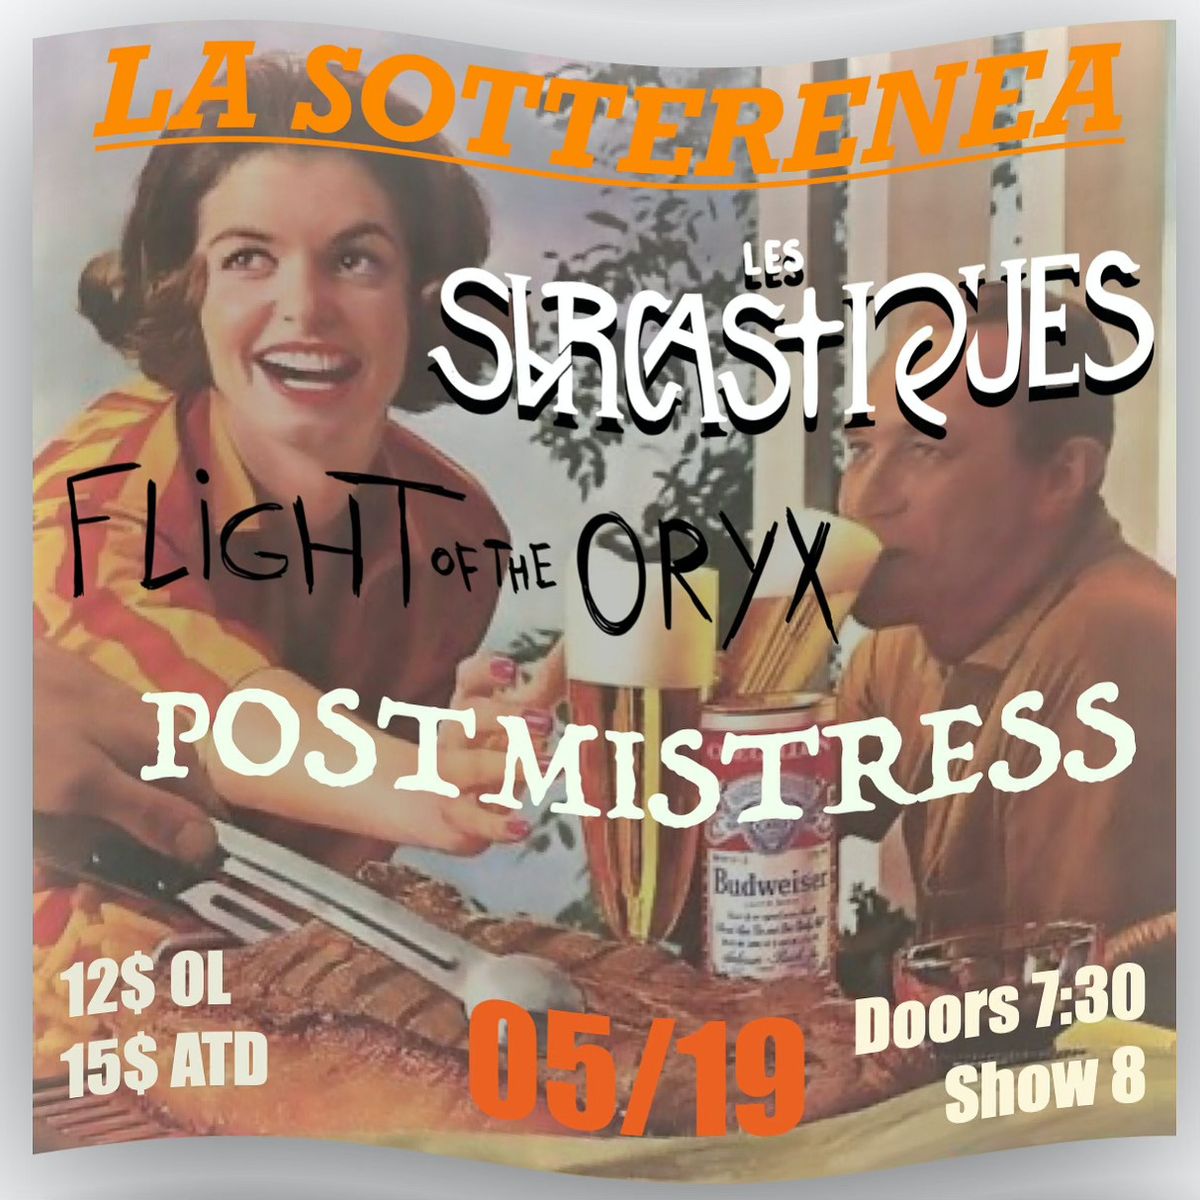 It's Party time! Les Sarcastiques, Flight Of The Oryx & Postmistress